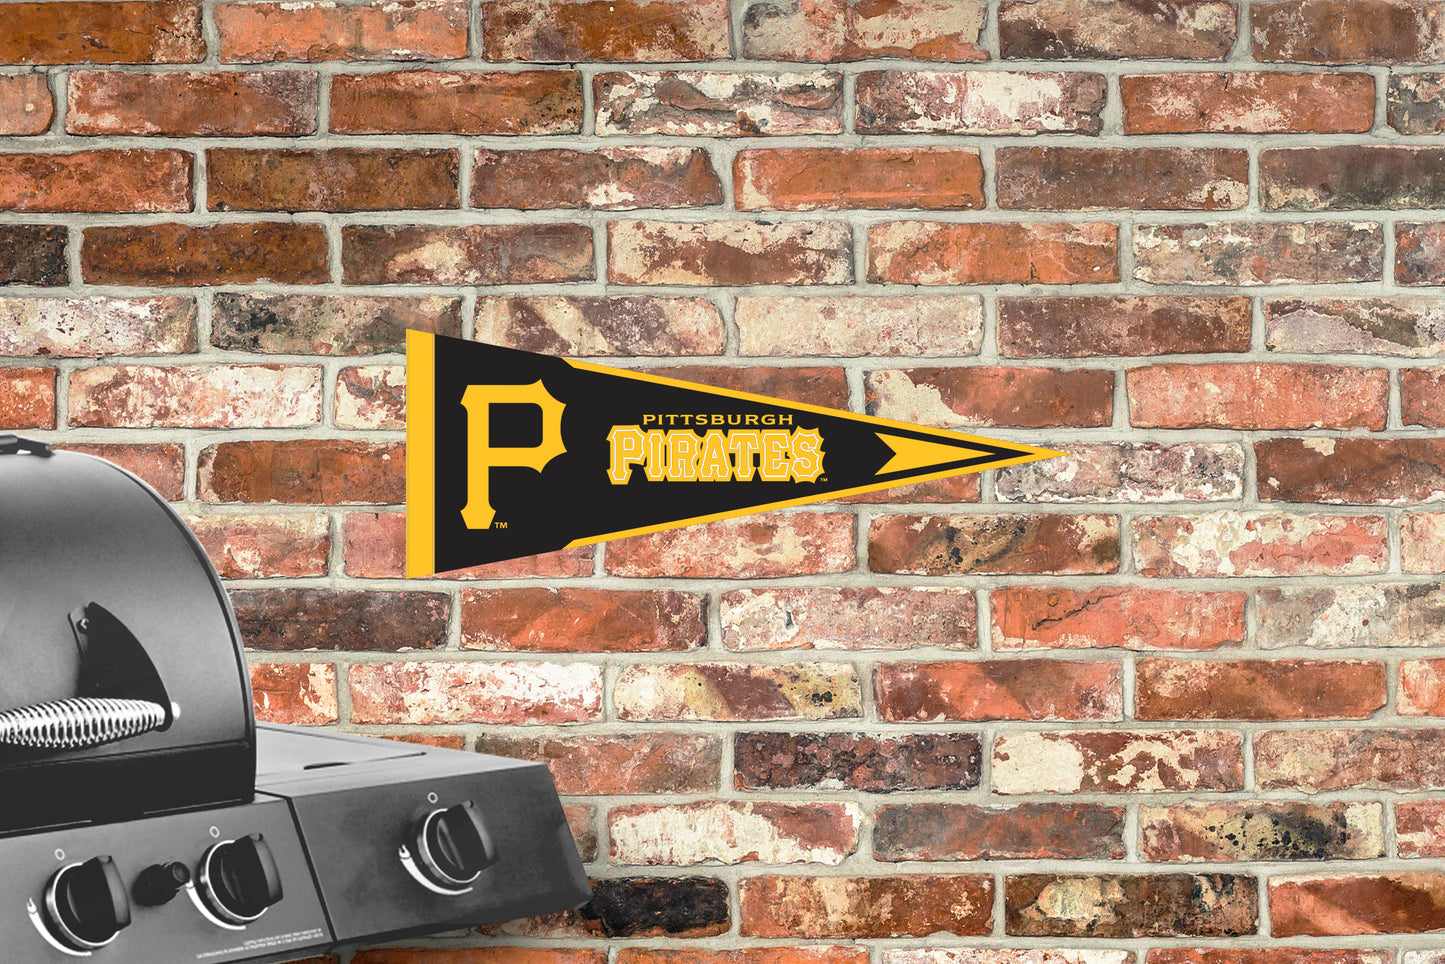 Pittsburgh Pirates: Pennant - Officially Licensed MLB Outdoor Graphic